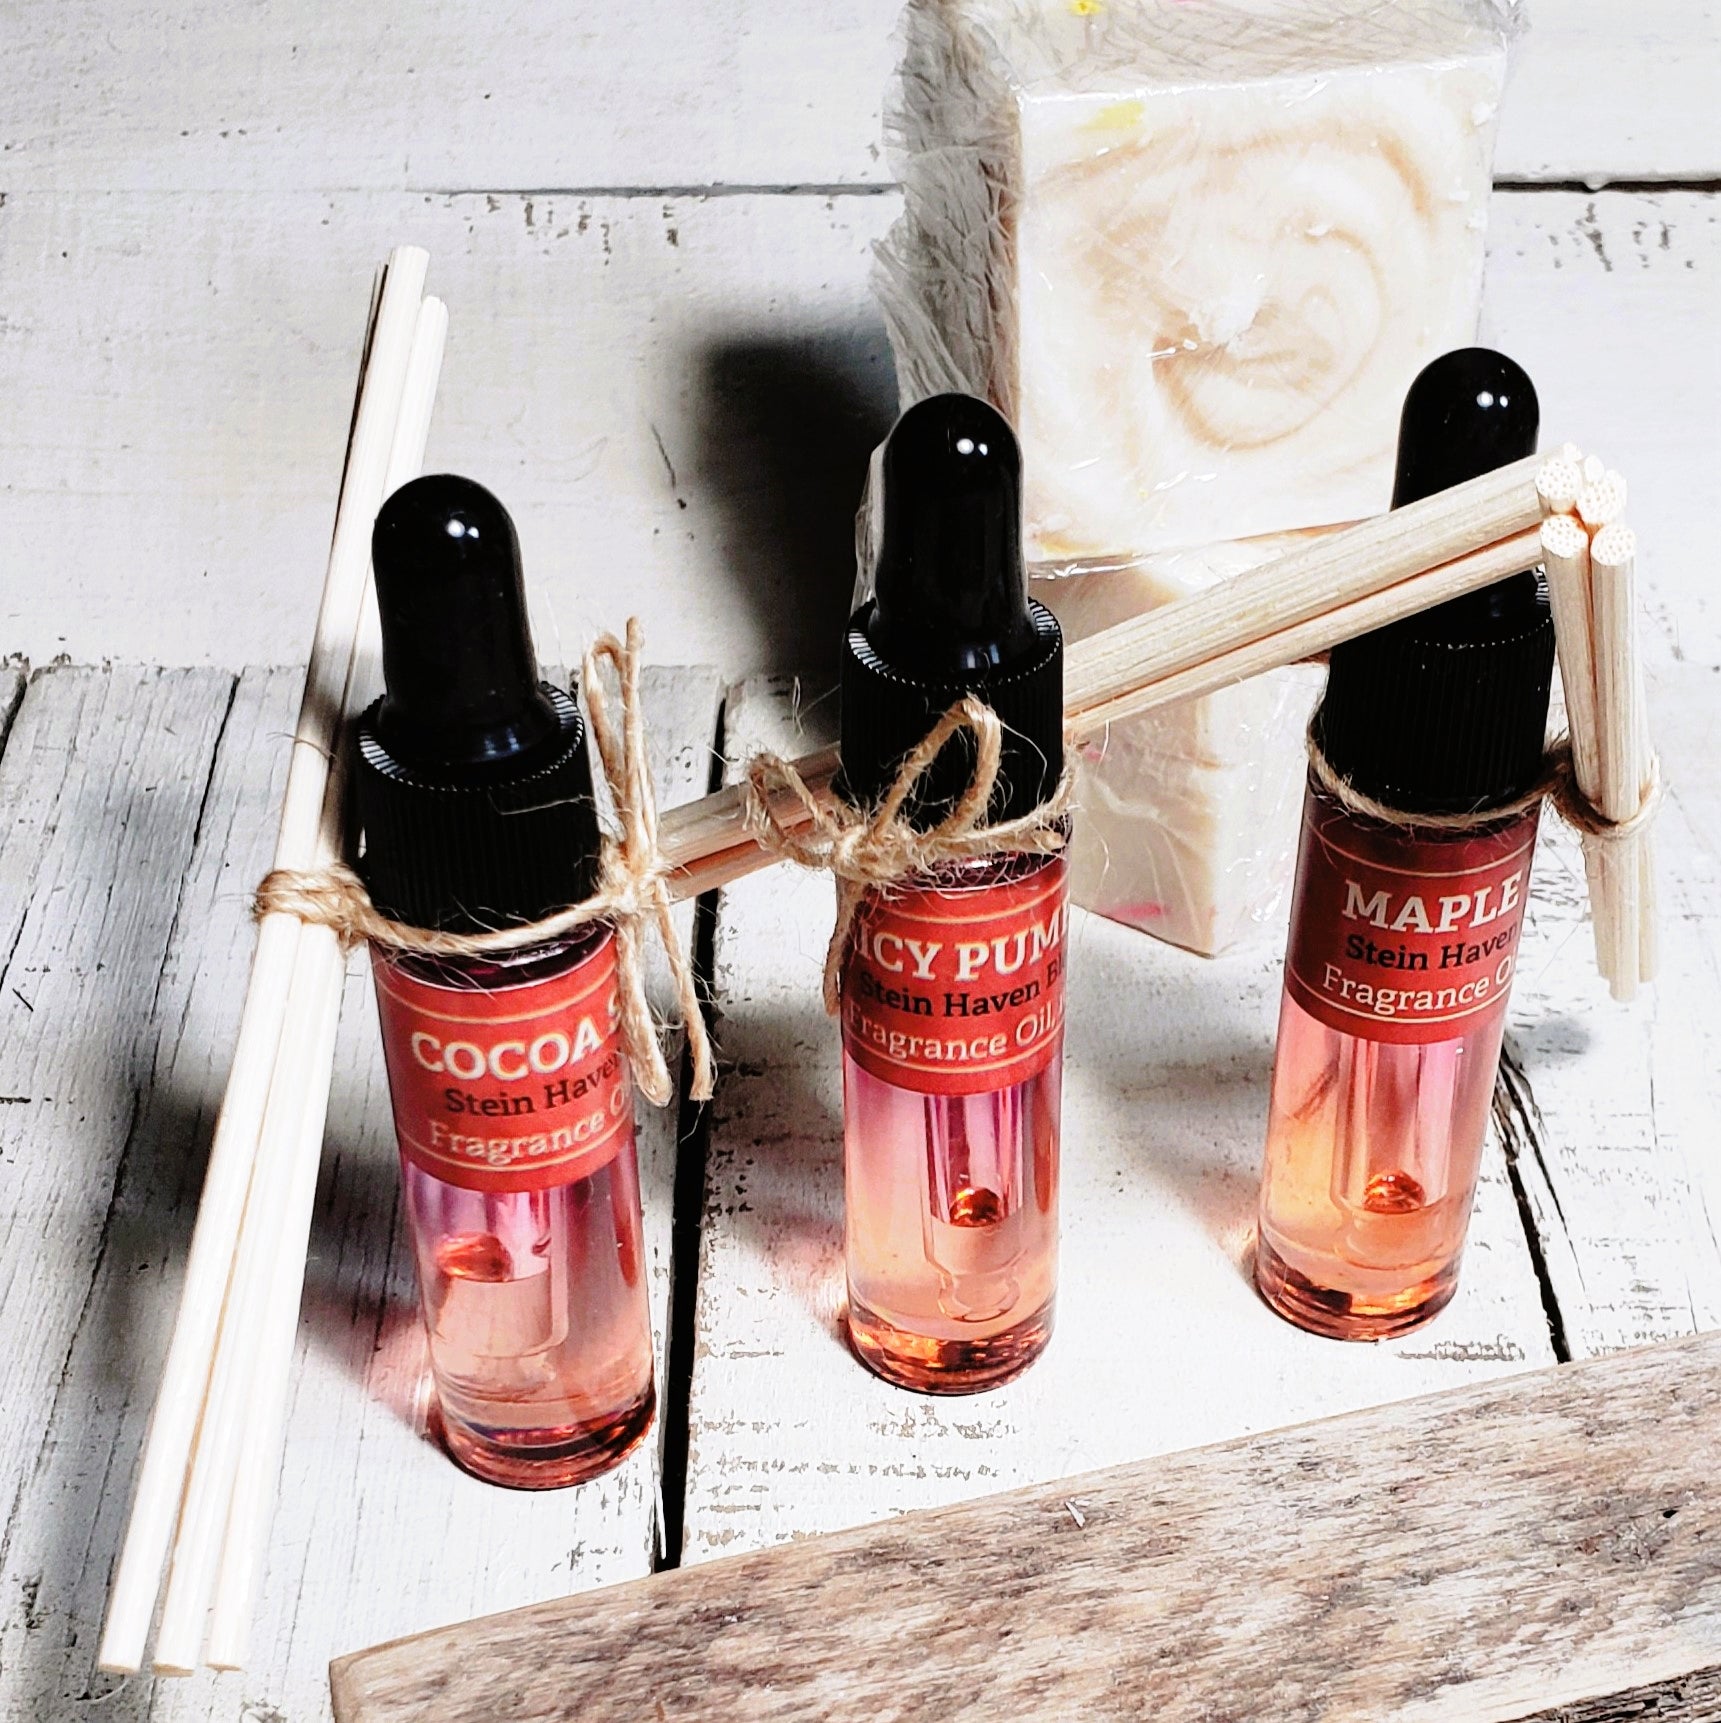 Blended Home Fragrance Oils, Eyedropper Vile, 10ml, with Diffuser Reeds- Cocoa Spice, Spicy Pumpkin & Maple Tea